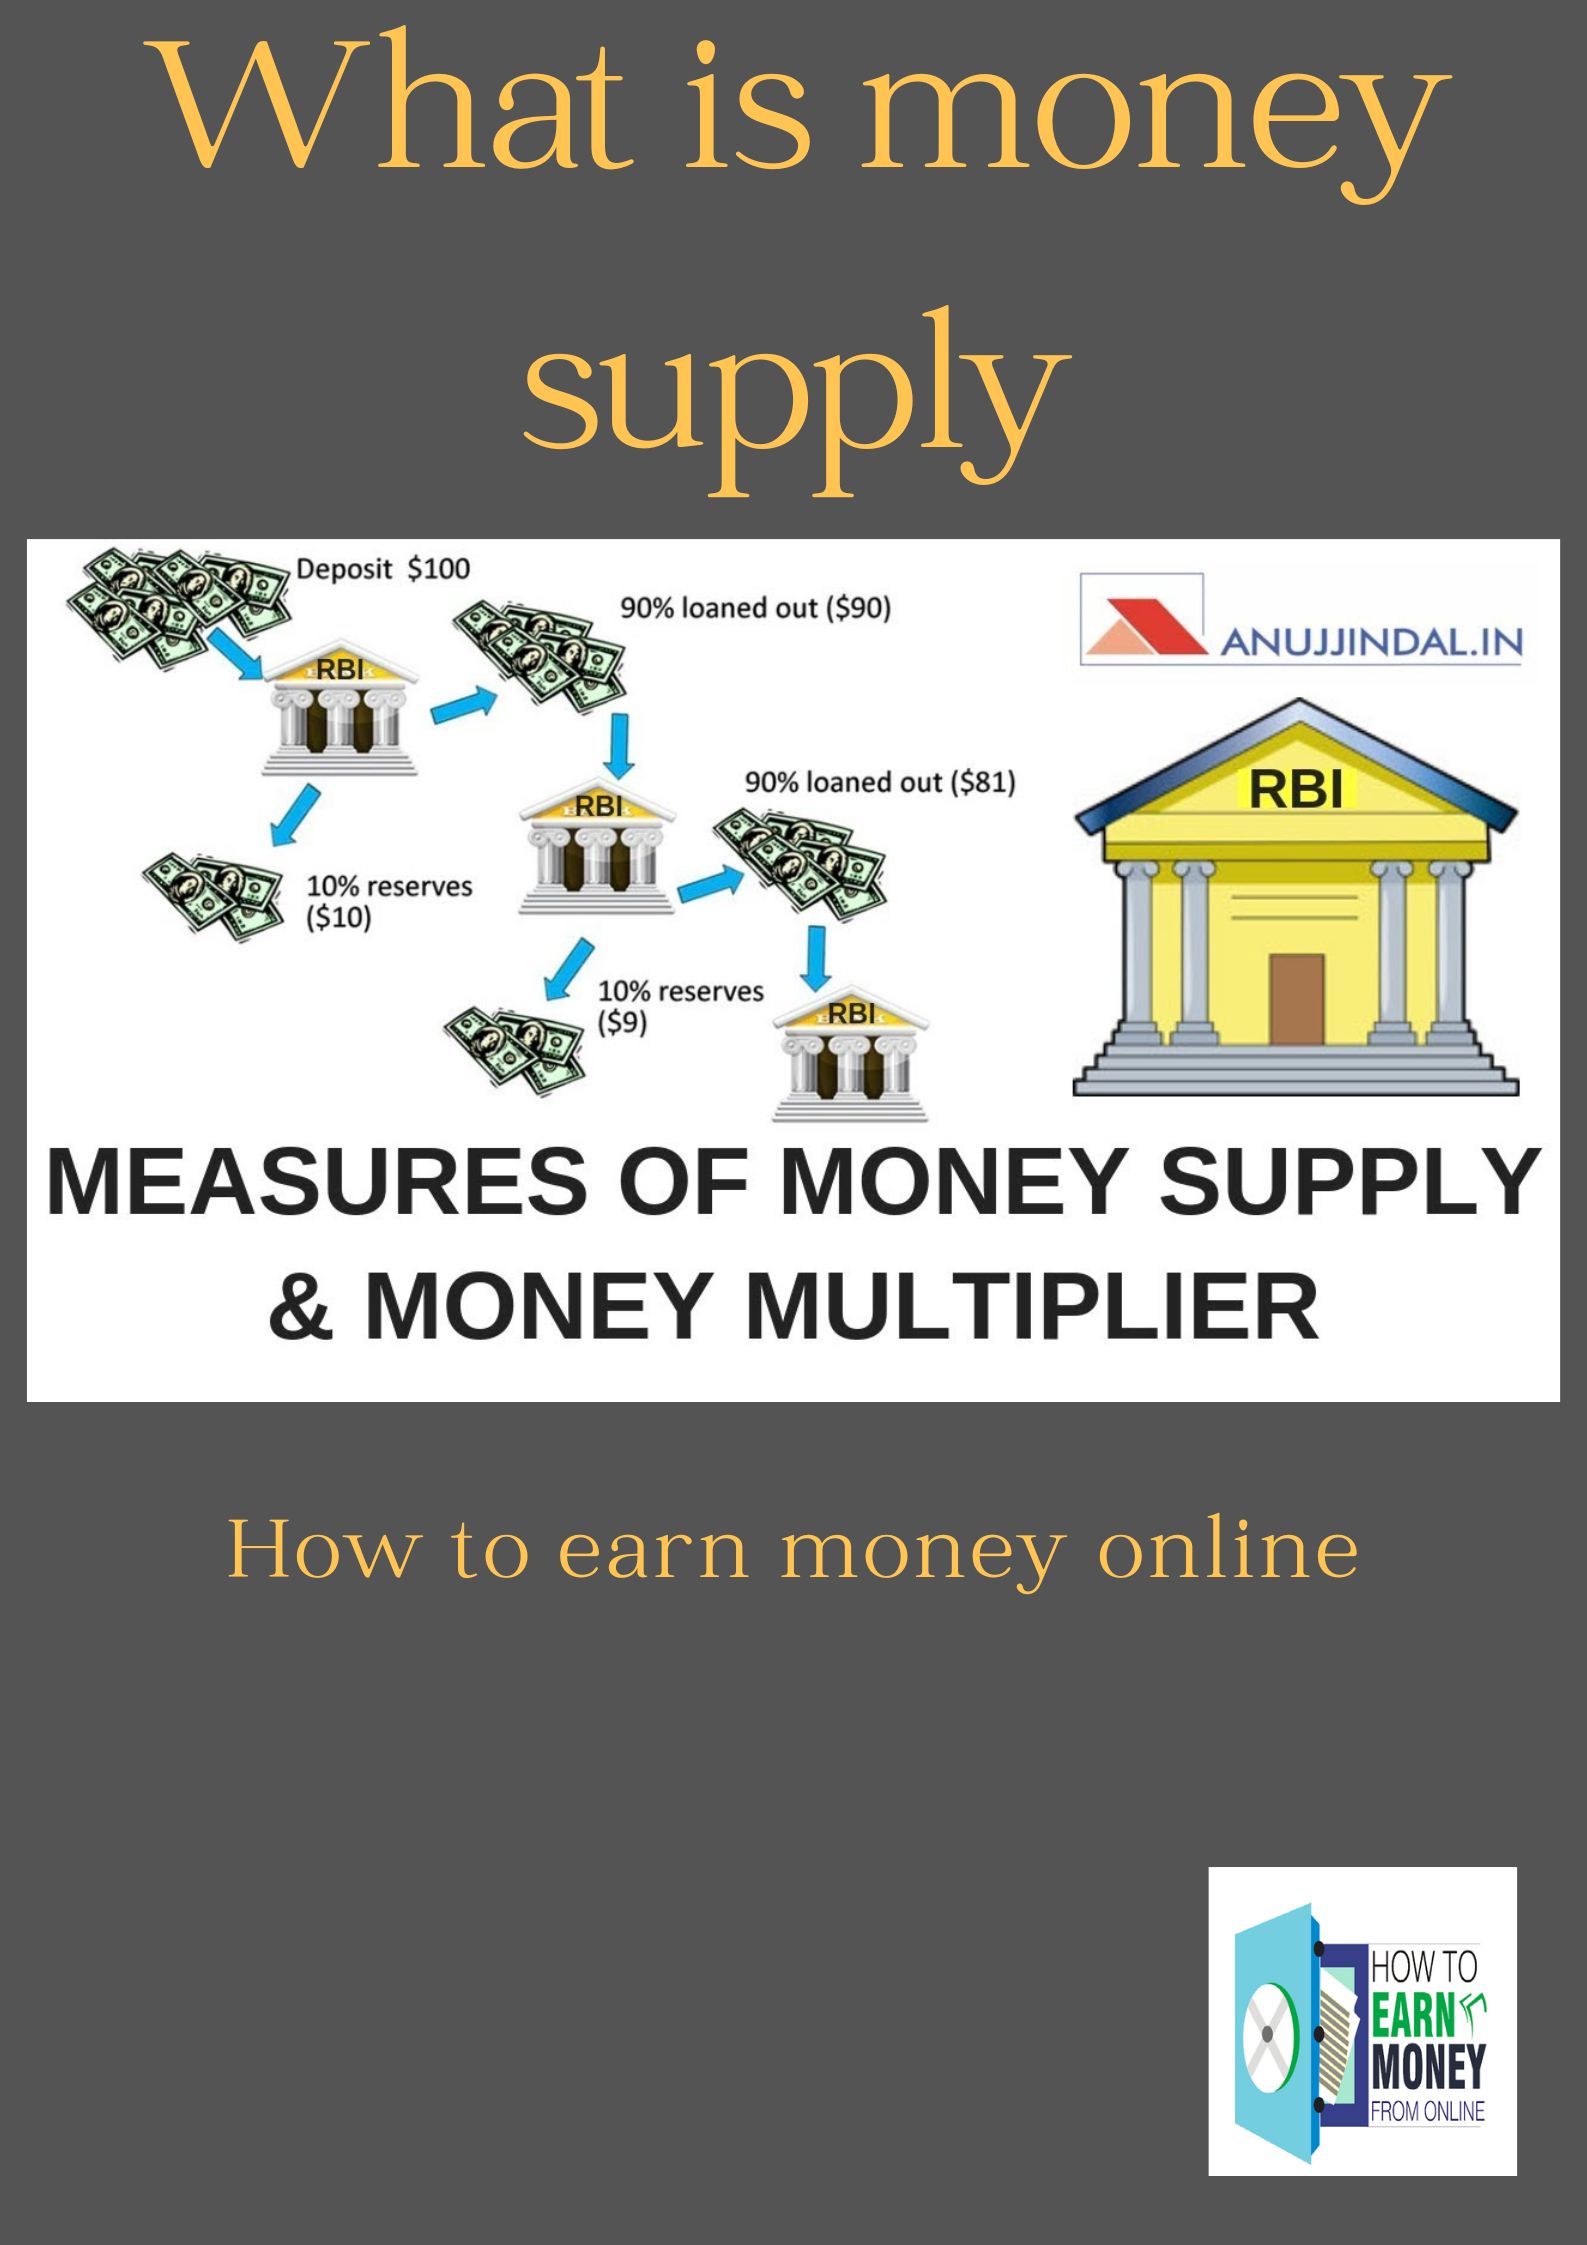 What is money supply